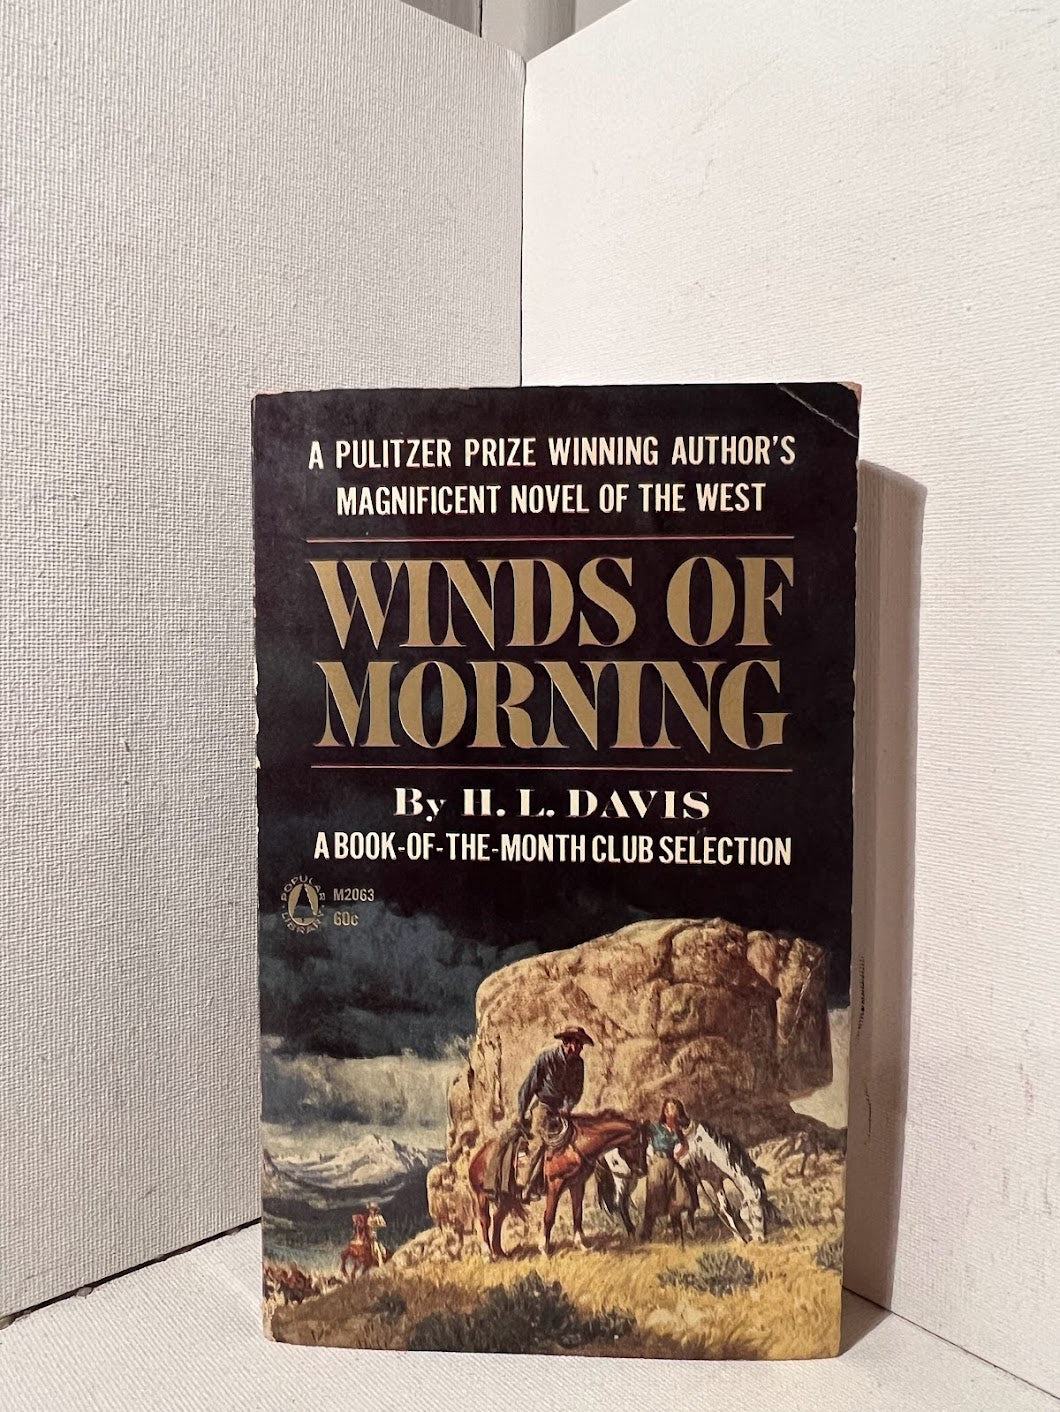 Winds of Morning by H.L. Davis